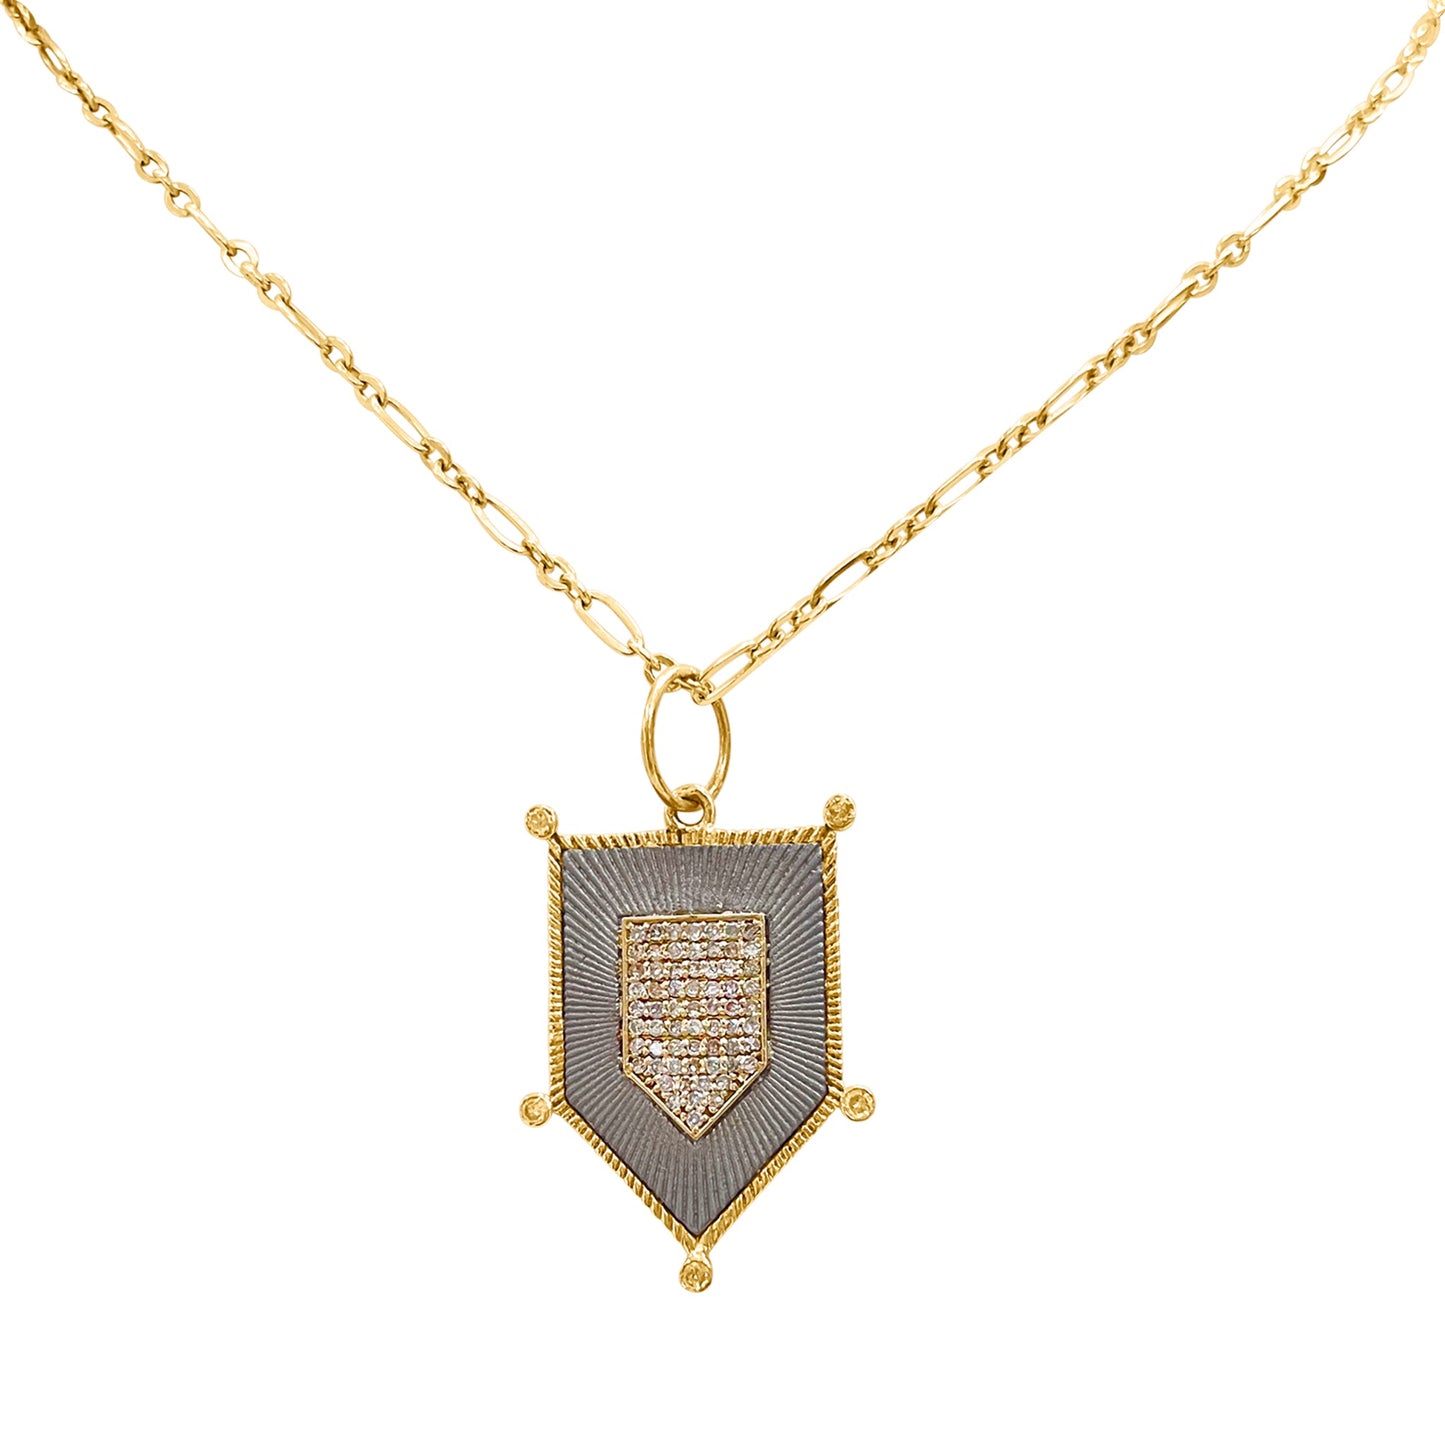 The Outlander Shield Necklace